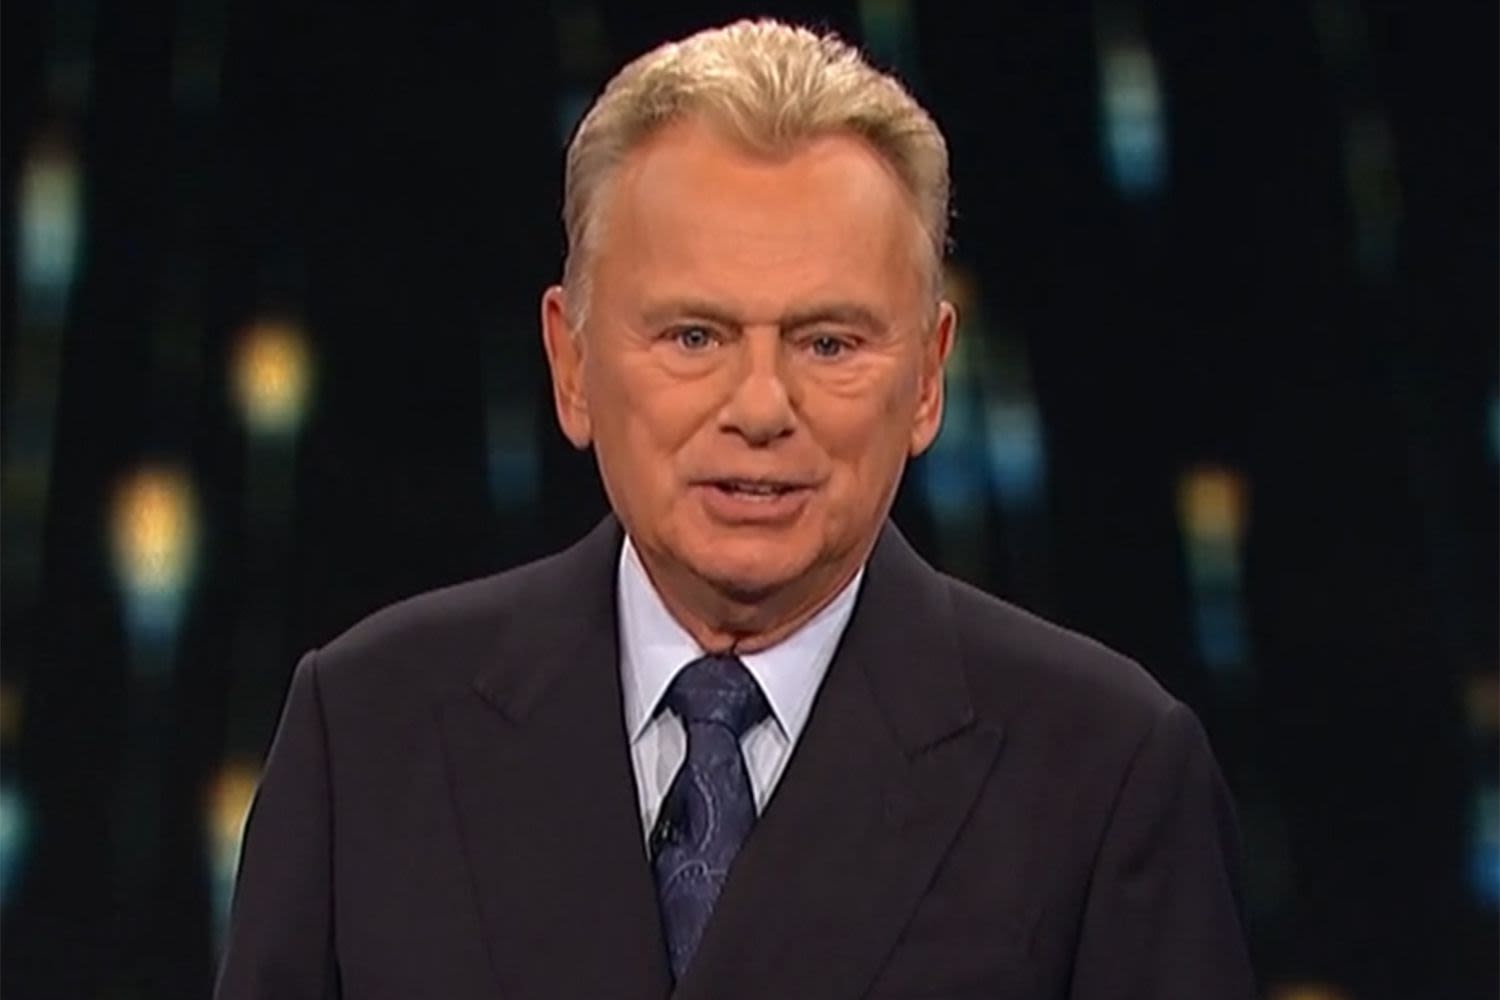 Pat Sajak Says Goodbye to “Wheel of Fortune” Viewers in Emotional Speech: 'Thank You for Allowing Me Into Your Lives'